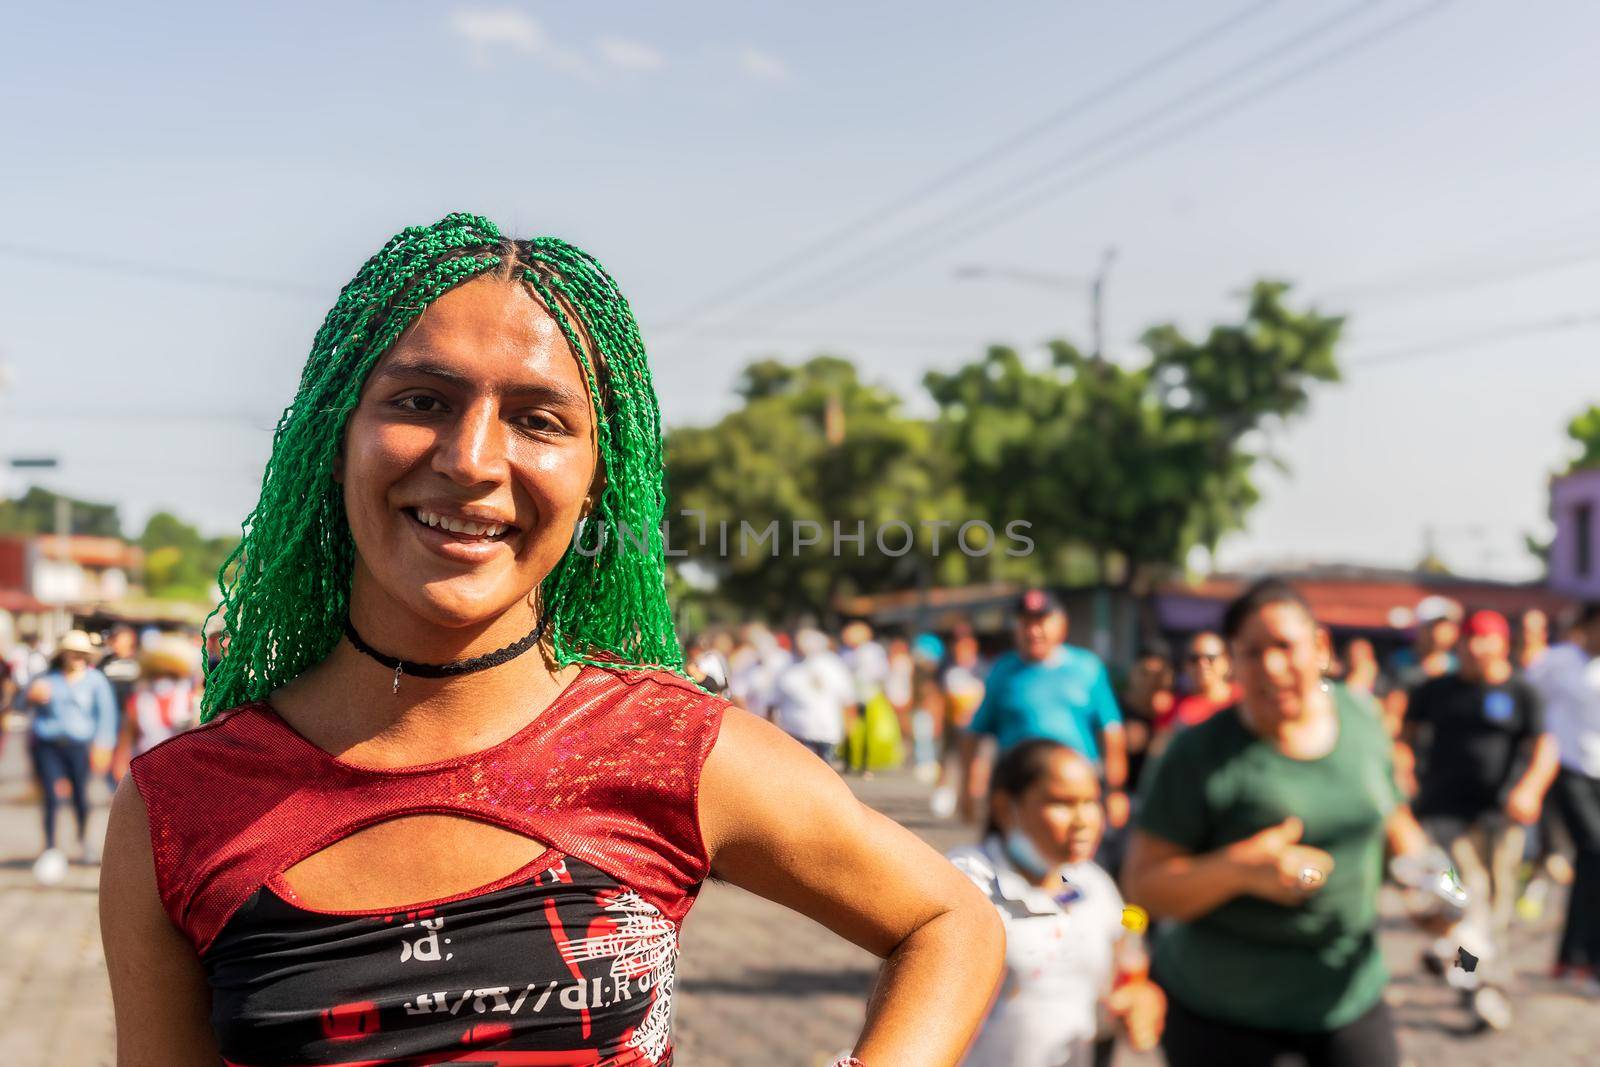 Young Latino gay with green braids outdoors smiling at camera in Managua, Nicaragua